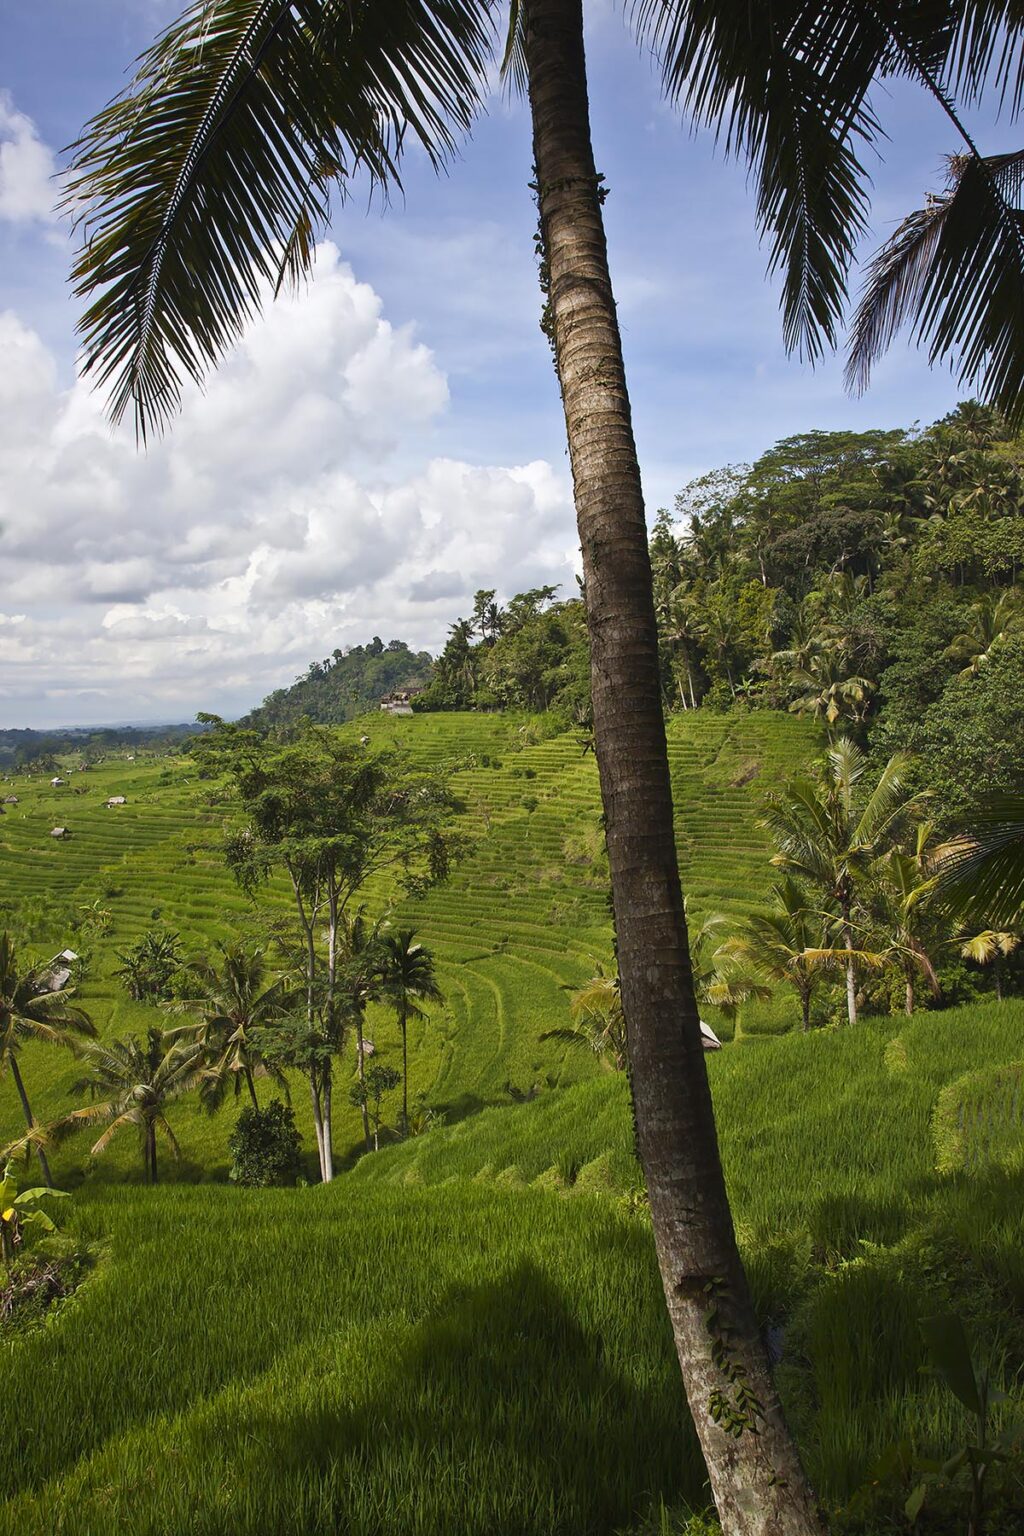 RICE TERRACES and COCONUT PALMS are a major part of the agriculture of the island as seen here along SIDEMAN ROAD - BALI, INDONESIA